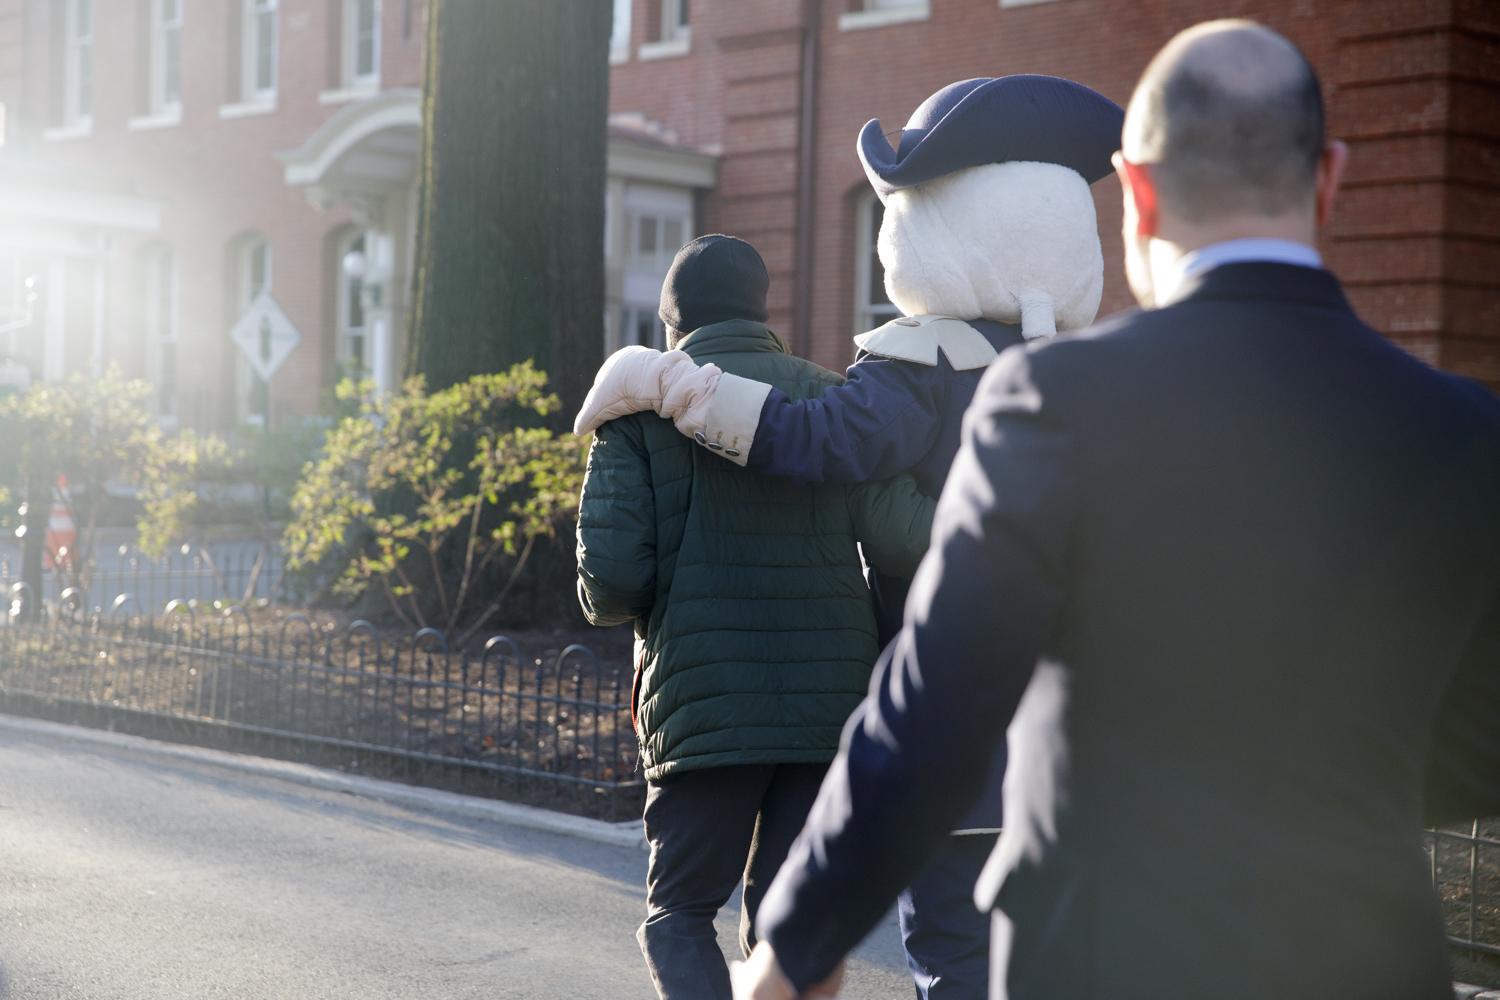 mascot George walks down the street with his arm around a GW community member